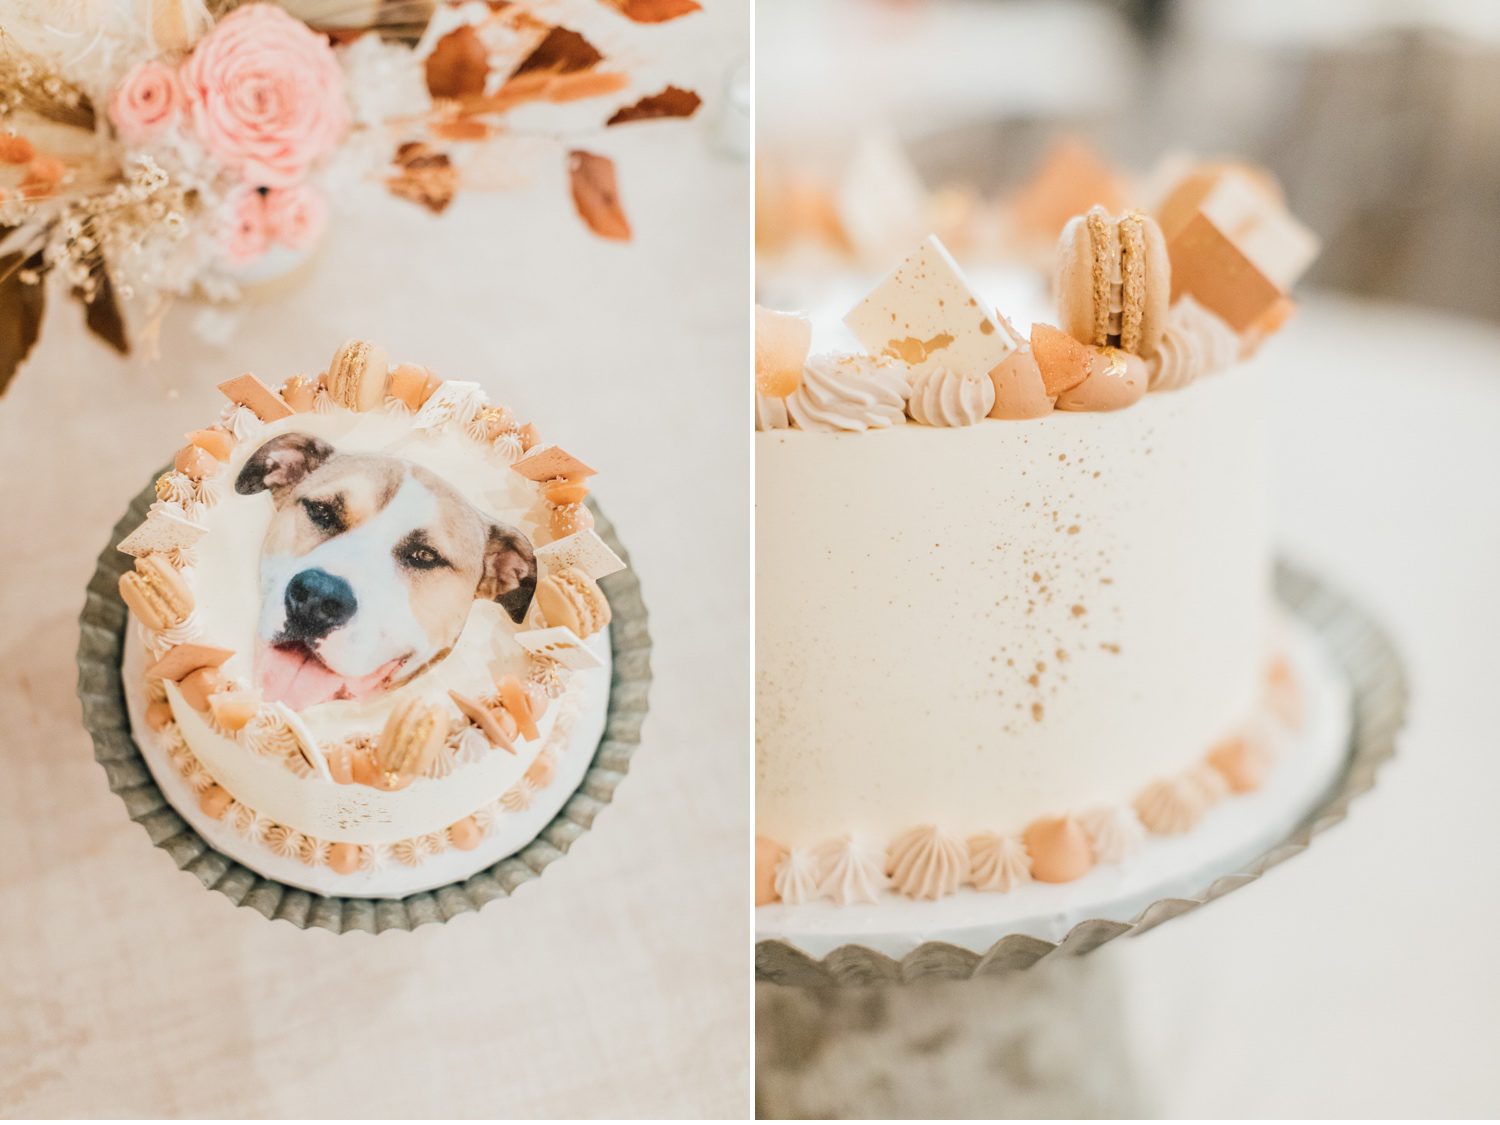 Wedding Cake with Dog topper